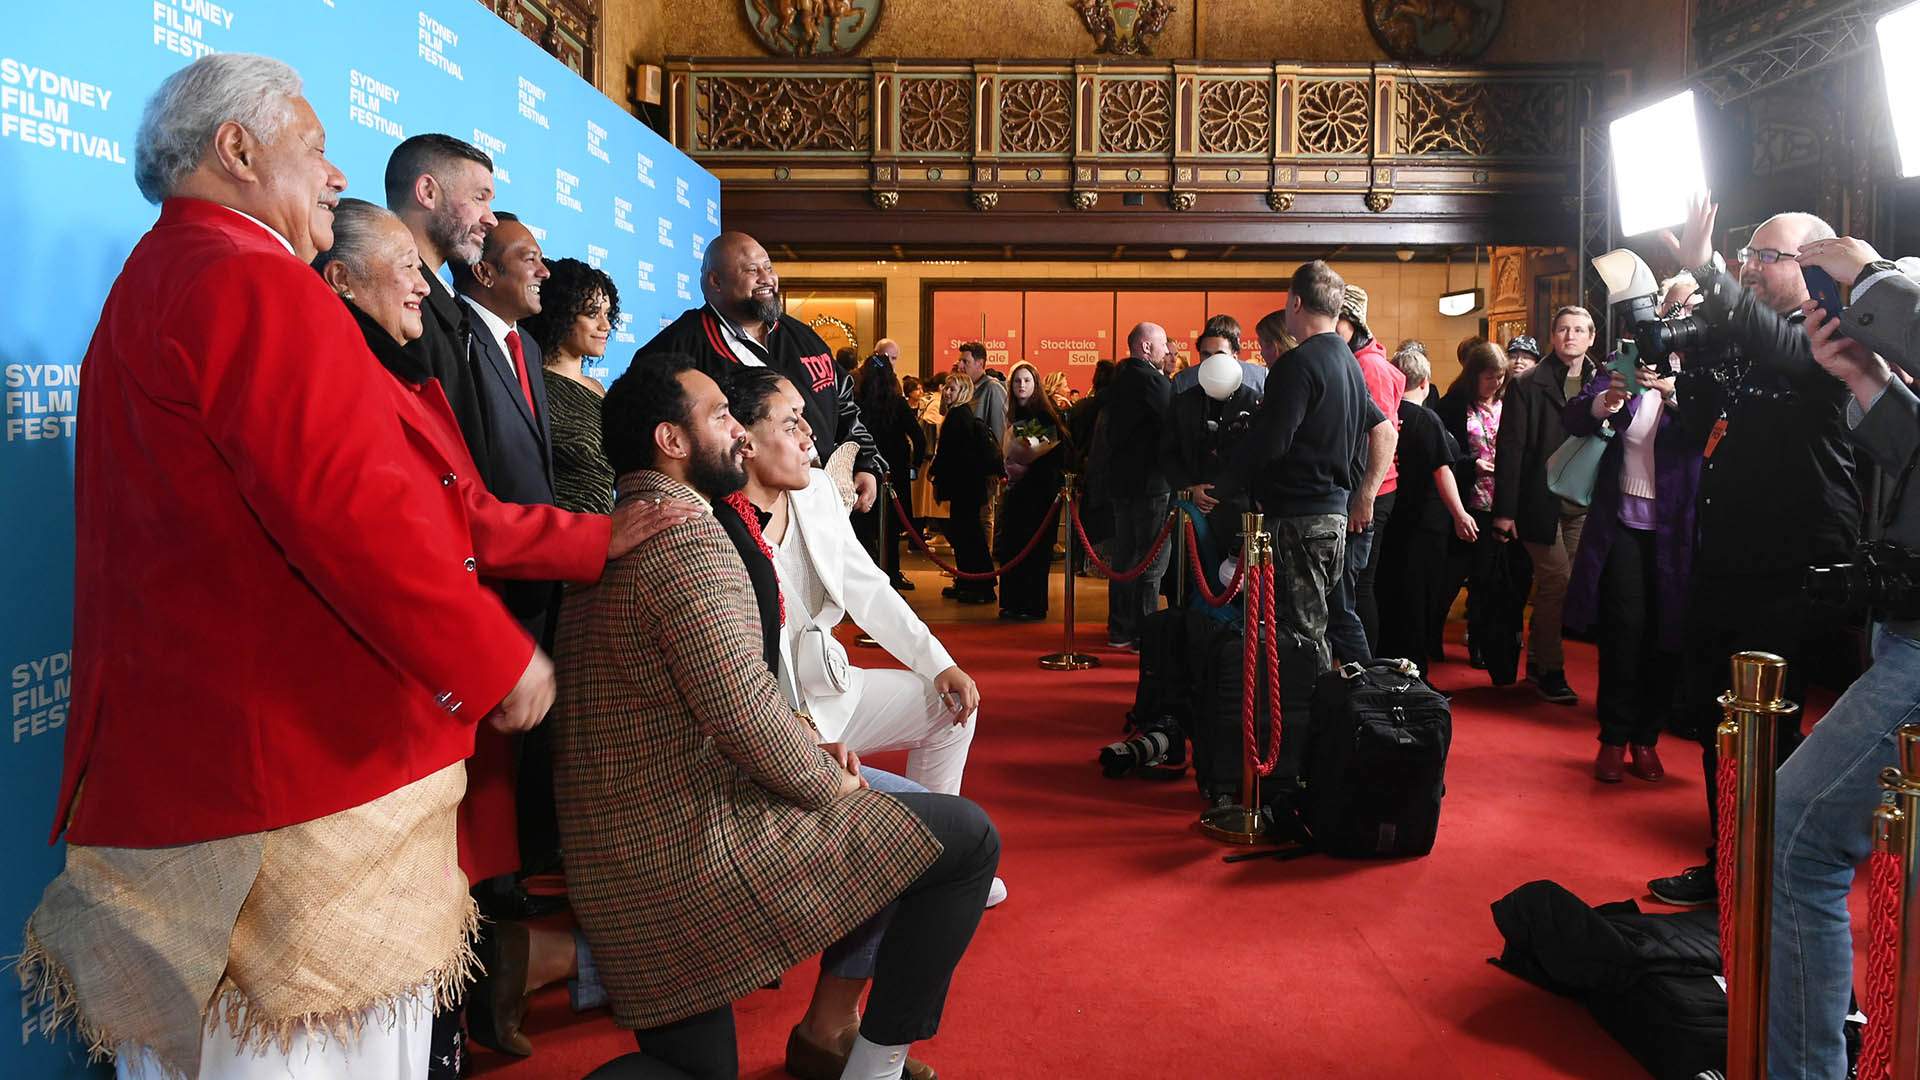 Sydney Film Festival Is Launching the World's Largest Cash Award for First Nations Filmmaking